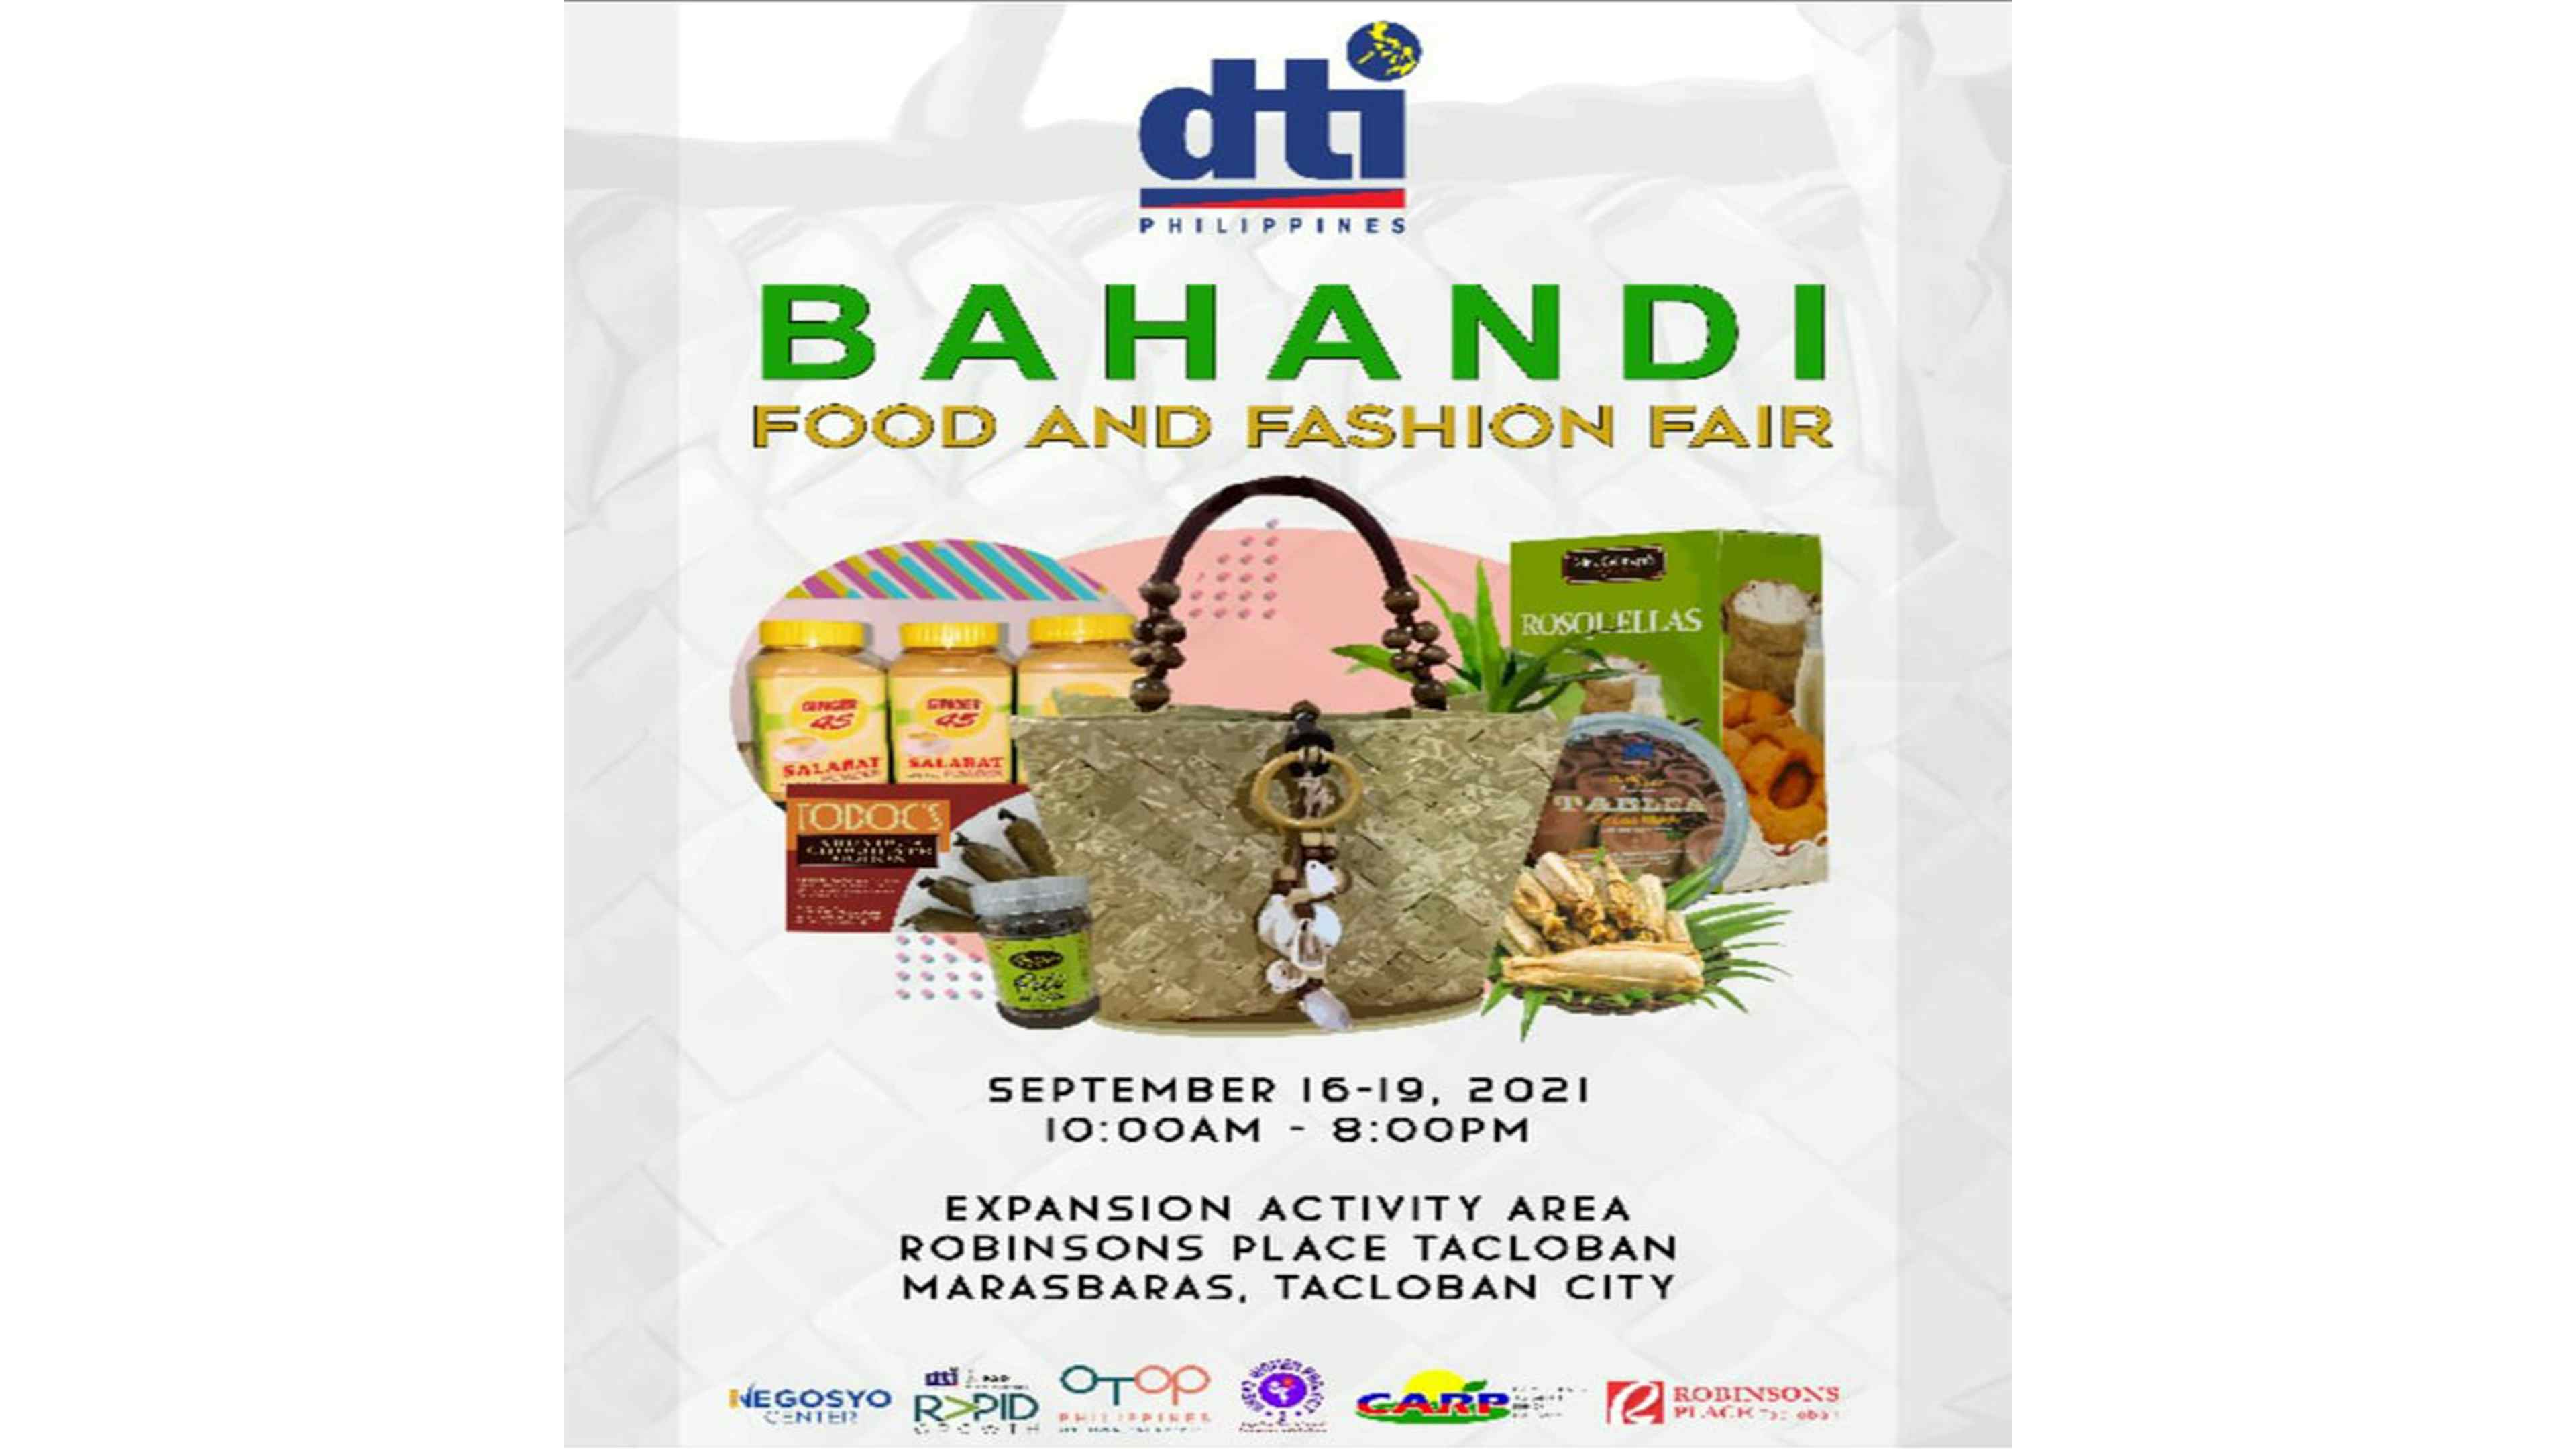 Bahandi Food and Fashion Fair comes back after pandemic -induced hiatus photo from Opinyon